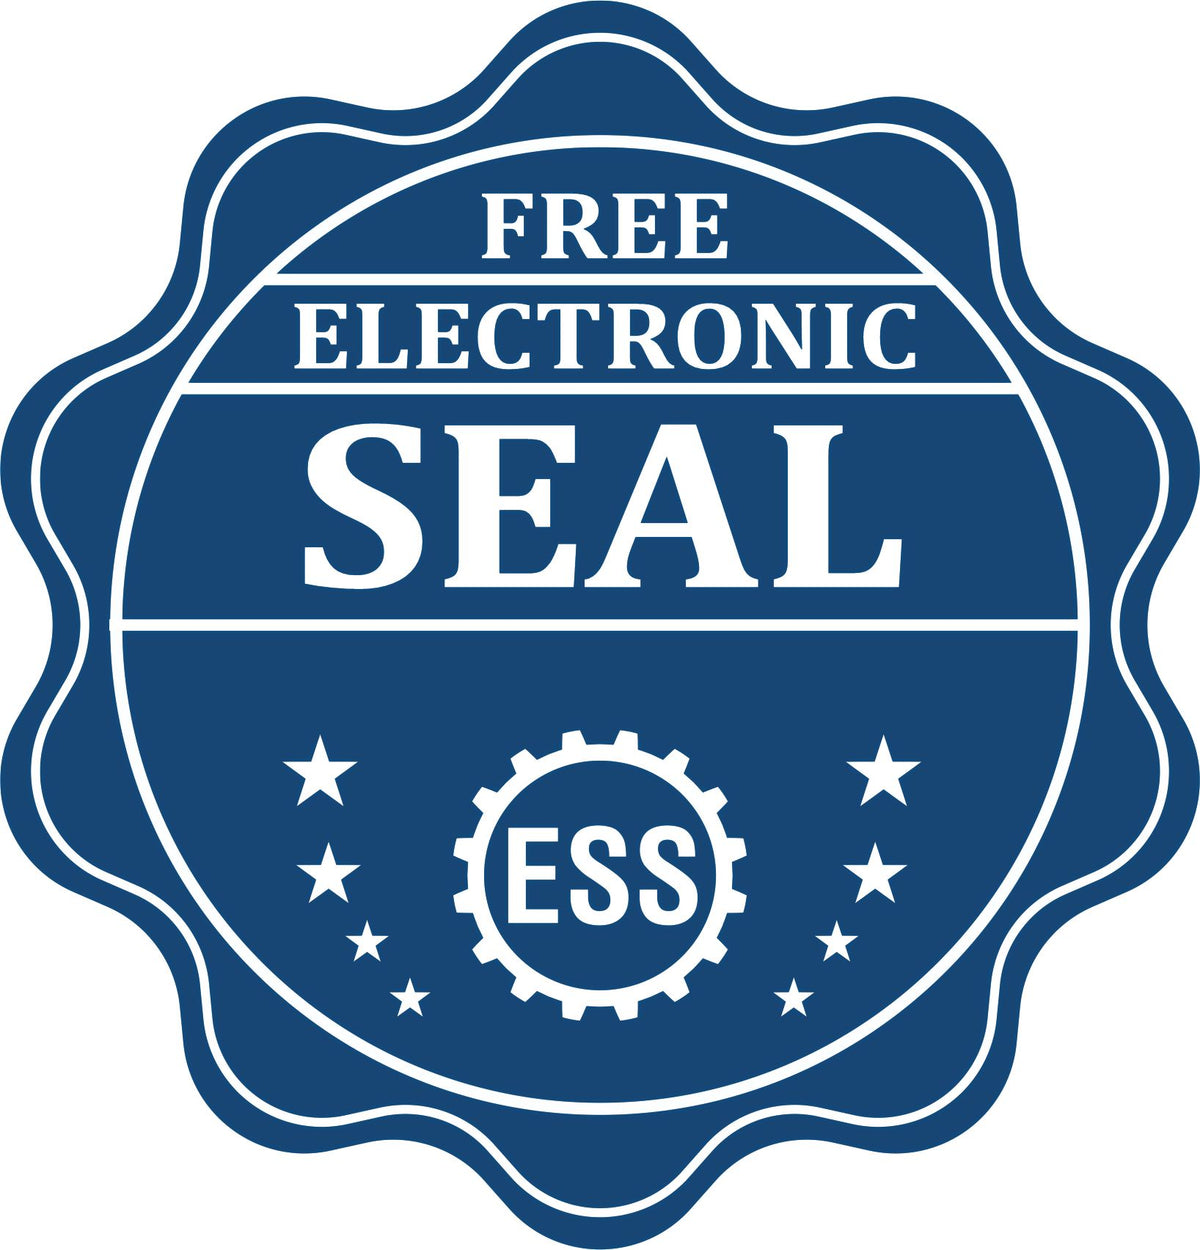 A badge showing a free electronic seal for the Hybrid Alabama Engineer Seal with stars and the ESS gear on the emblem.